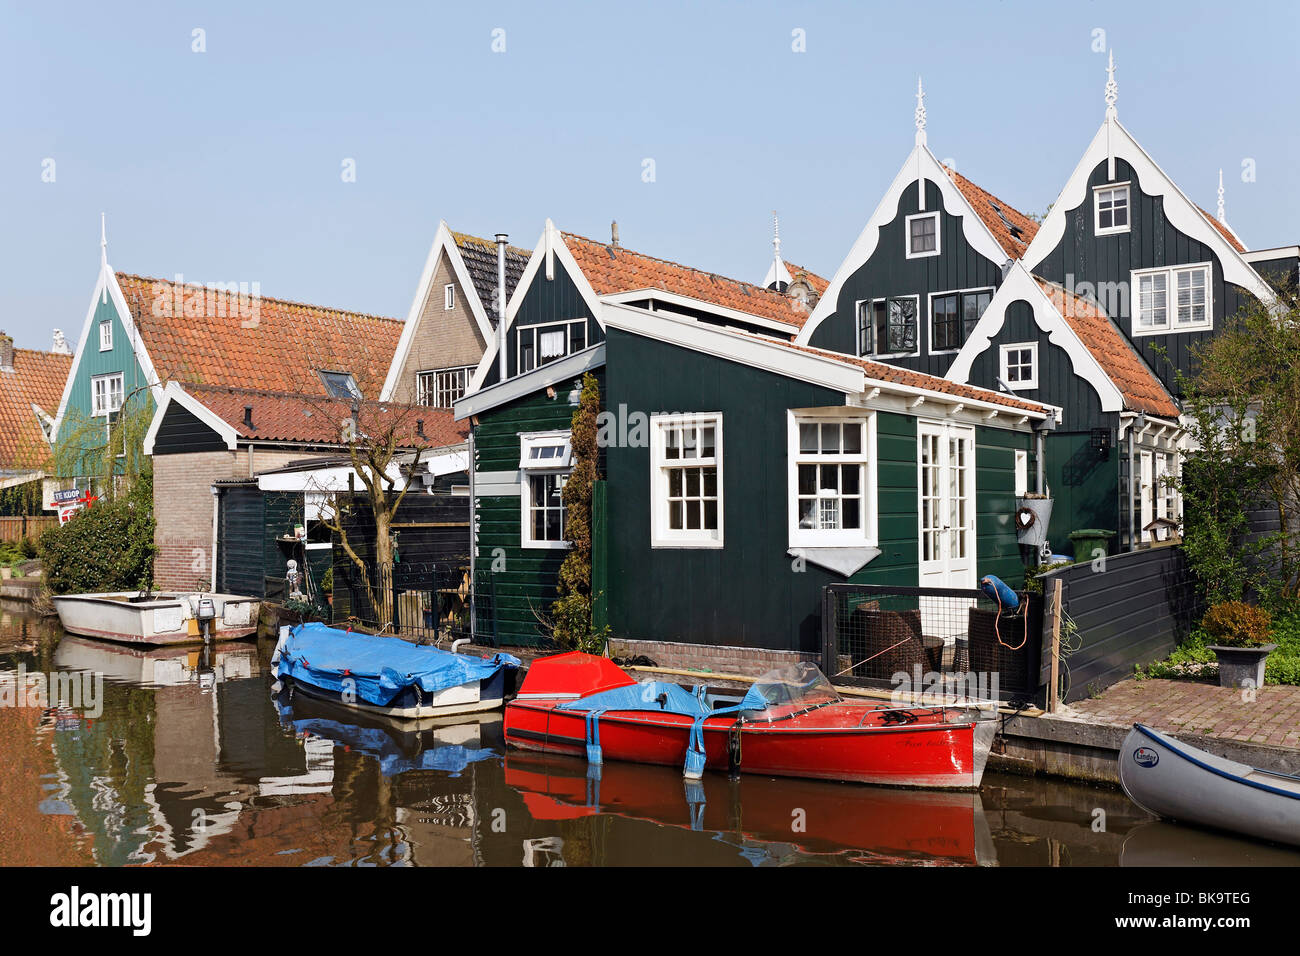 Typical wooden houses from the 17th century at a canal, historic city De Rijp near Alkmaar, Province of North Holland, Netherla Stock Photo